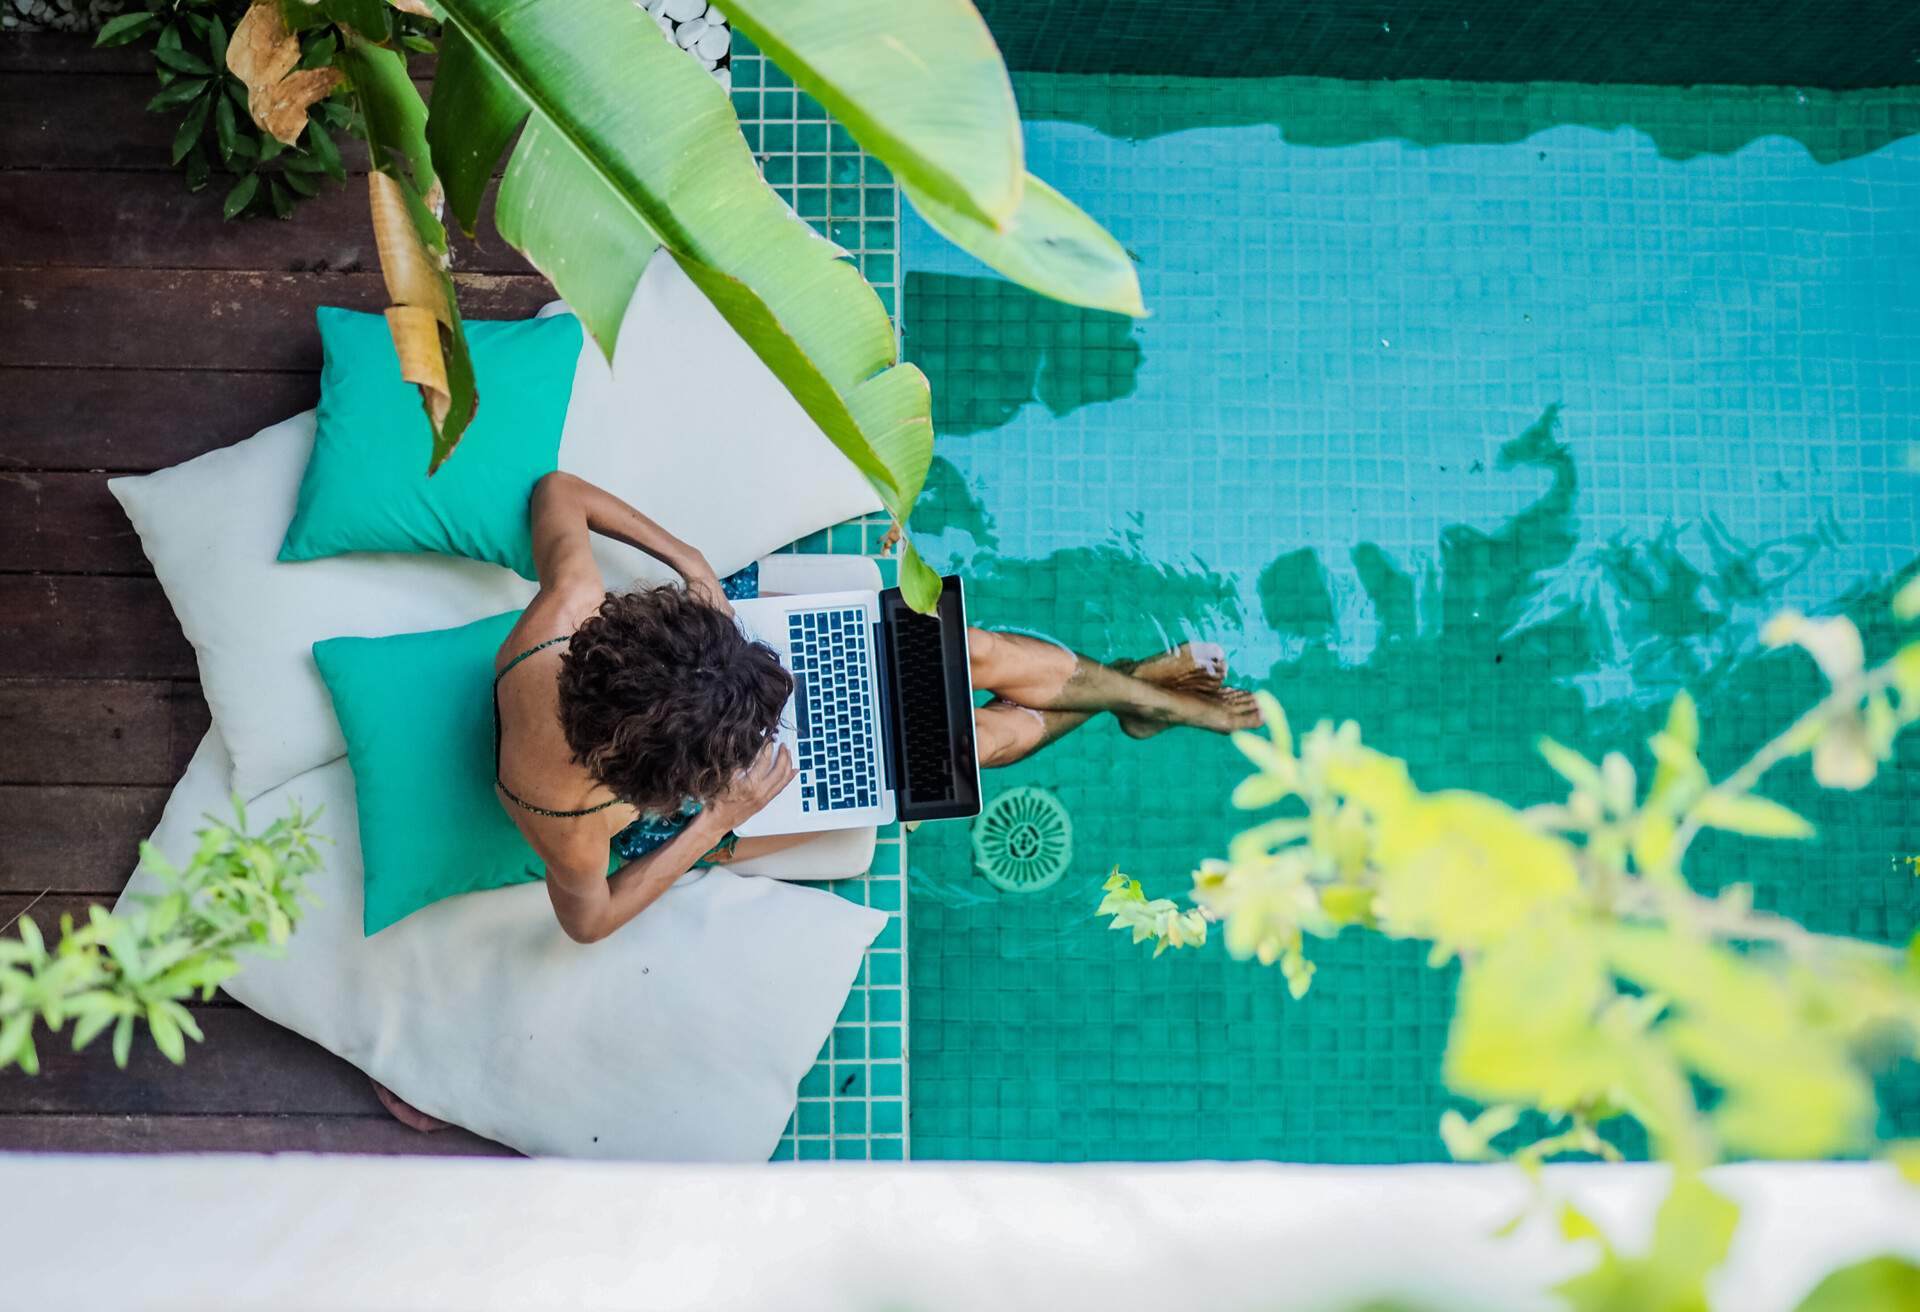 bird view of a remote online working digital nomad women with curly hair and laptop sitting at a sunny turquoise water pool surrounded by cushions and plants in the foreground; Shutterstock ID 1742840084; Purpose: any; Brand (KAYAK, Momondo, Any): any